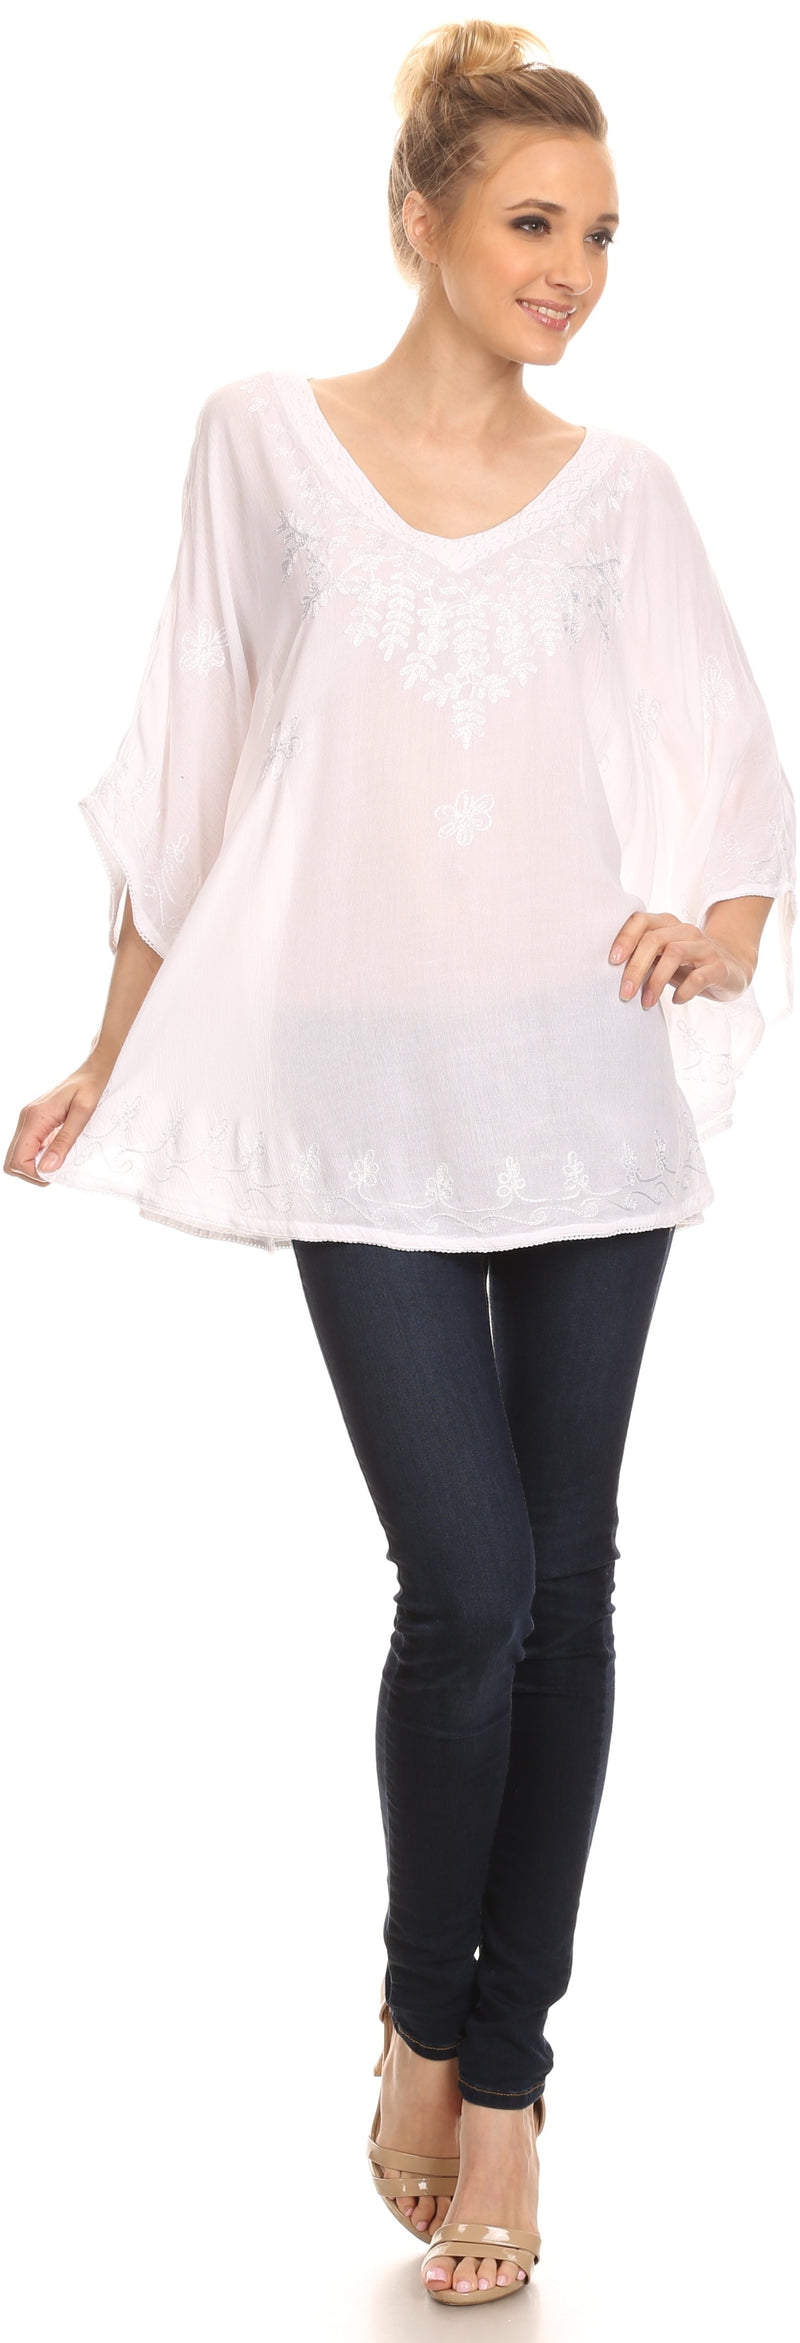 Sakkas Valeray Nature Floral Embroidered Wide Long Poncho Tunic Blouse Shirt Top